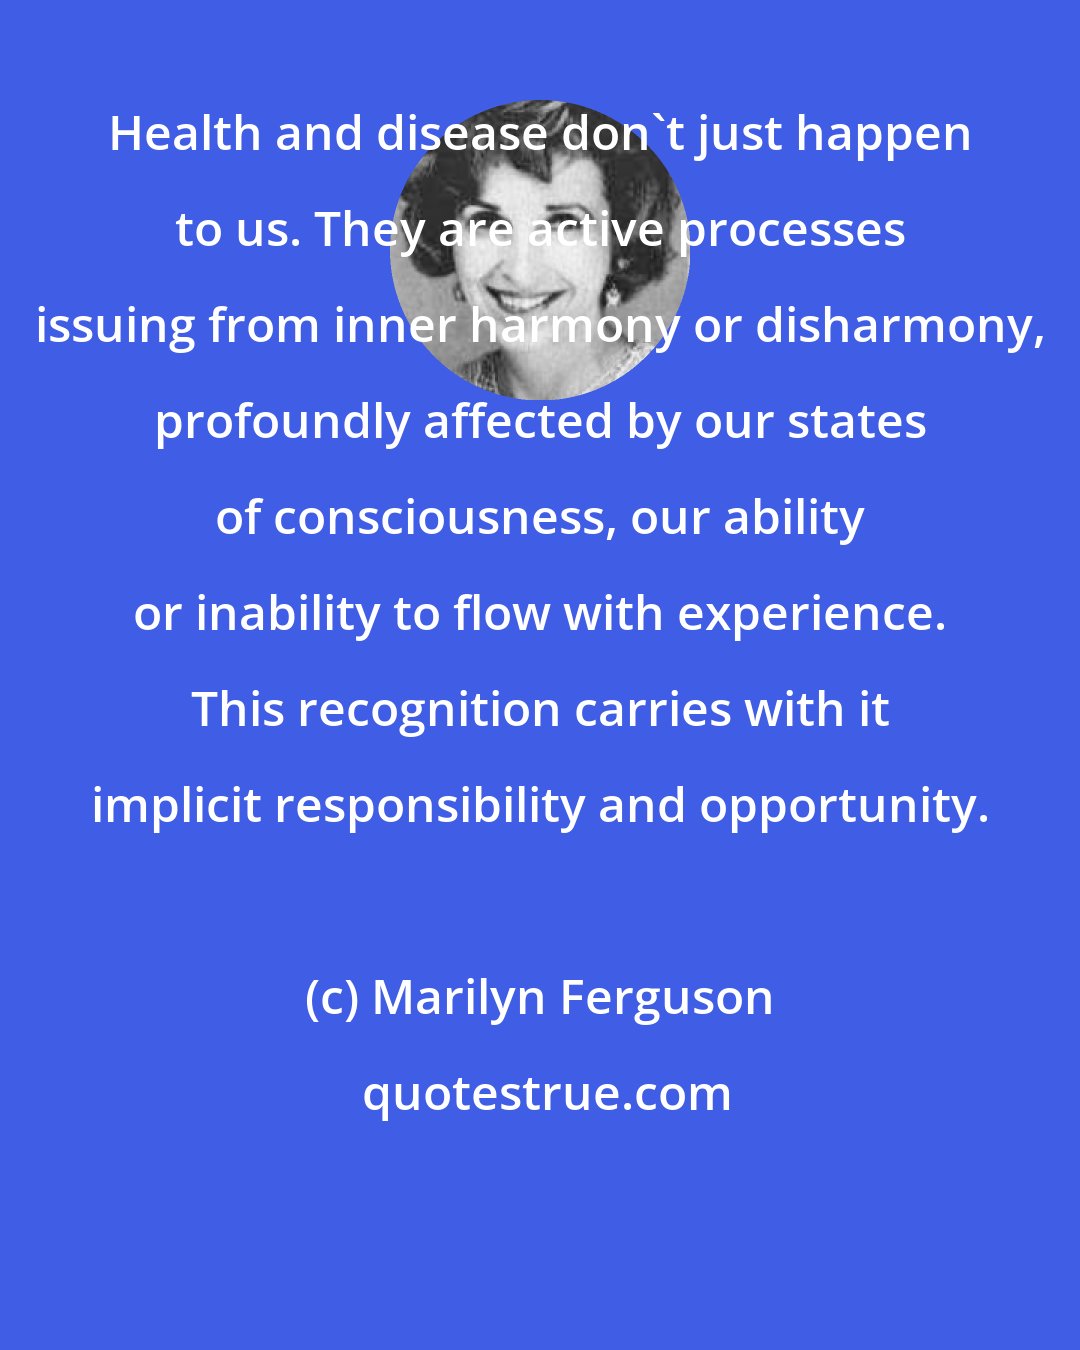 Marilyn Ferguson: Health and disease don't just happen to us. They are active processes issuing from inner harmony or disharmony, profoundly affected by our states of consciousness, our ability or inability to flow with experience. This recognition carries with it implicit responsibility and opportunity.